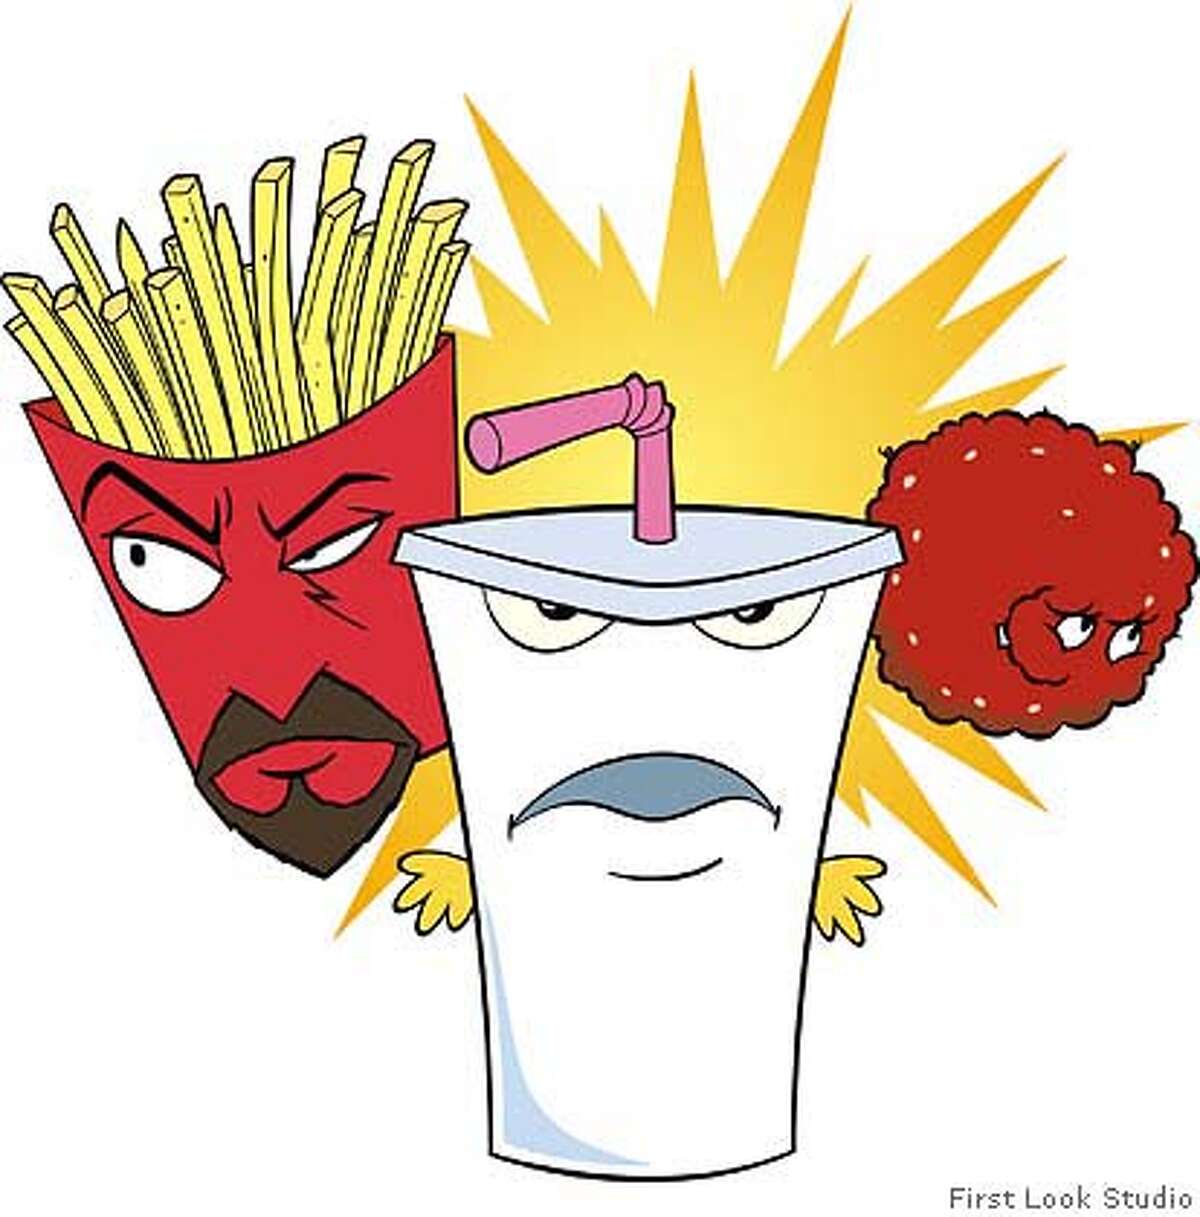 AQUA TEEN HUNGER FORCE COLON MOVIE FILM FOR THEATERS Opens April 13, 2007 in Bay Area theatres Matt Maiellaro and Dave Willis�s animated action-adventure-comedy, AQUA TEEN HUNGER FORCE COLON MOVIE FILM FOR THEATERS, opens April 13 in Bay Area theatres. AQUA TEEN HUNGER FORCE COLON MOVIE FILM FOR THEATERS, a First Look Studio release, runs 87 minutes, is in English and is MPAA rated R for crude and sexual humor, violent images and language.